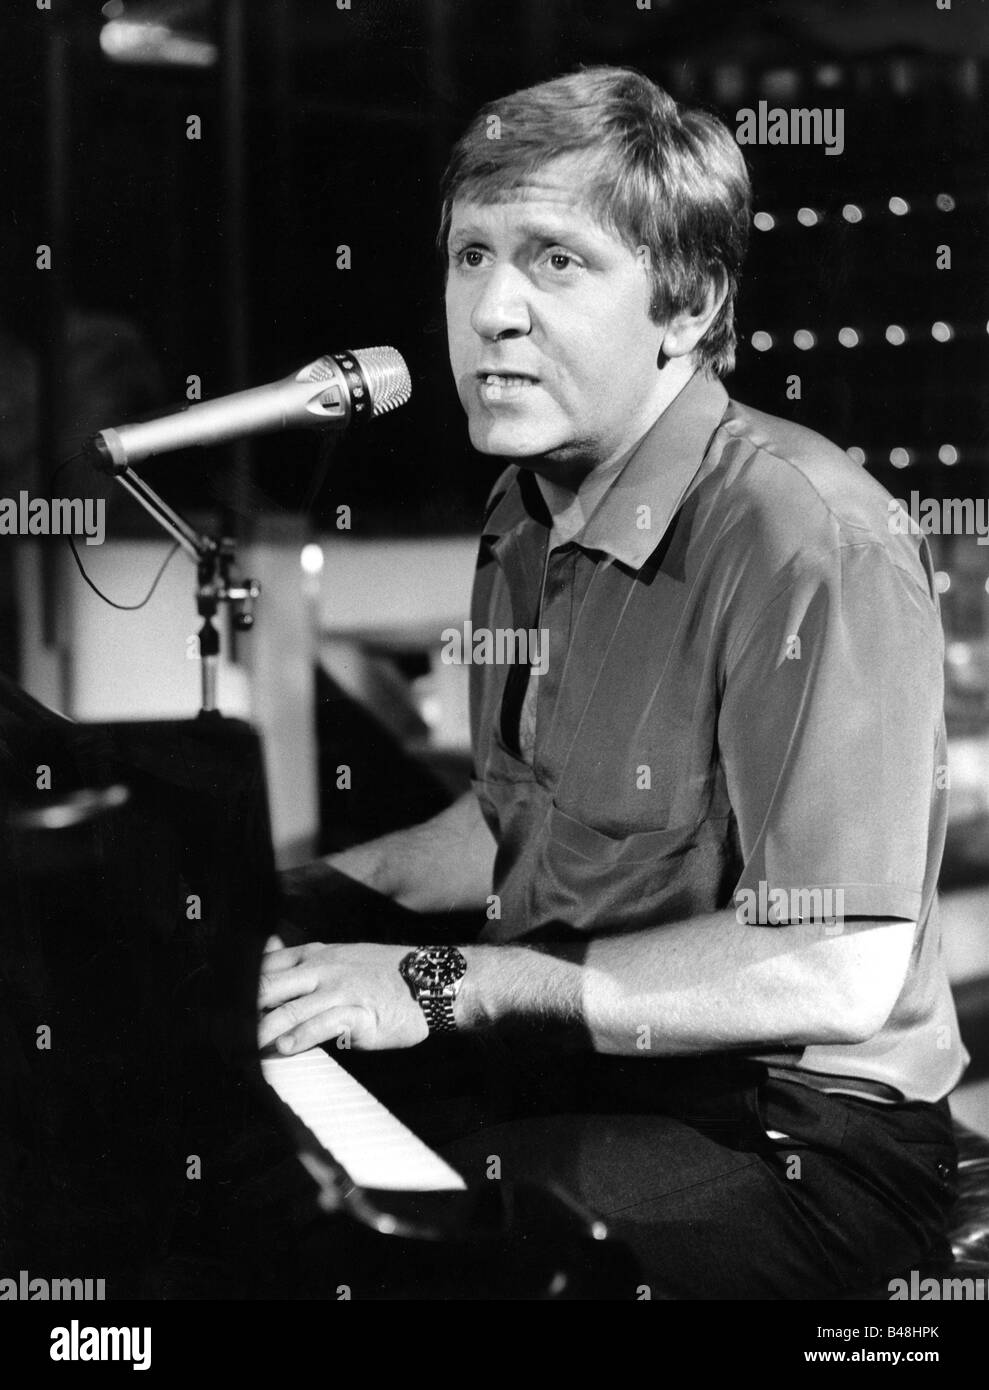 Sulke, Stephan, * 27.12.1943, German singer and composer, (pop music), half length, during performance at ARD telecast, 'Wunschkonzert', playing piano, 7.2.1985, Stock Photo